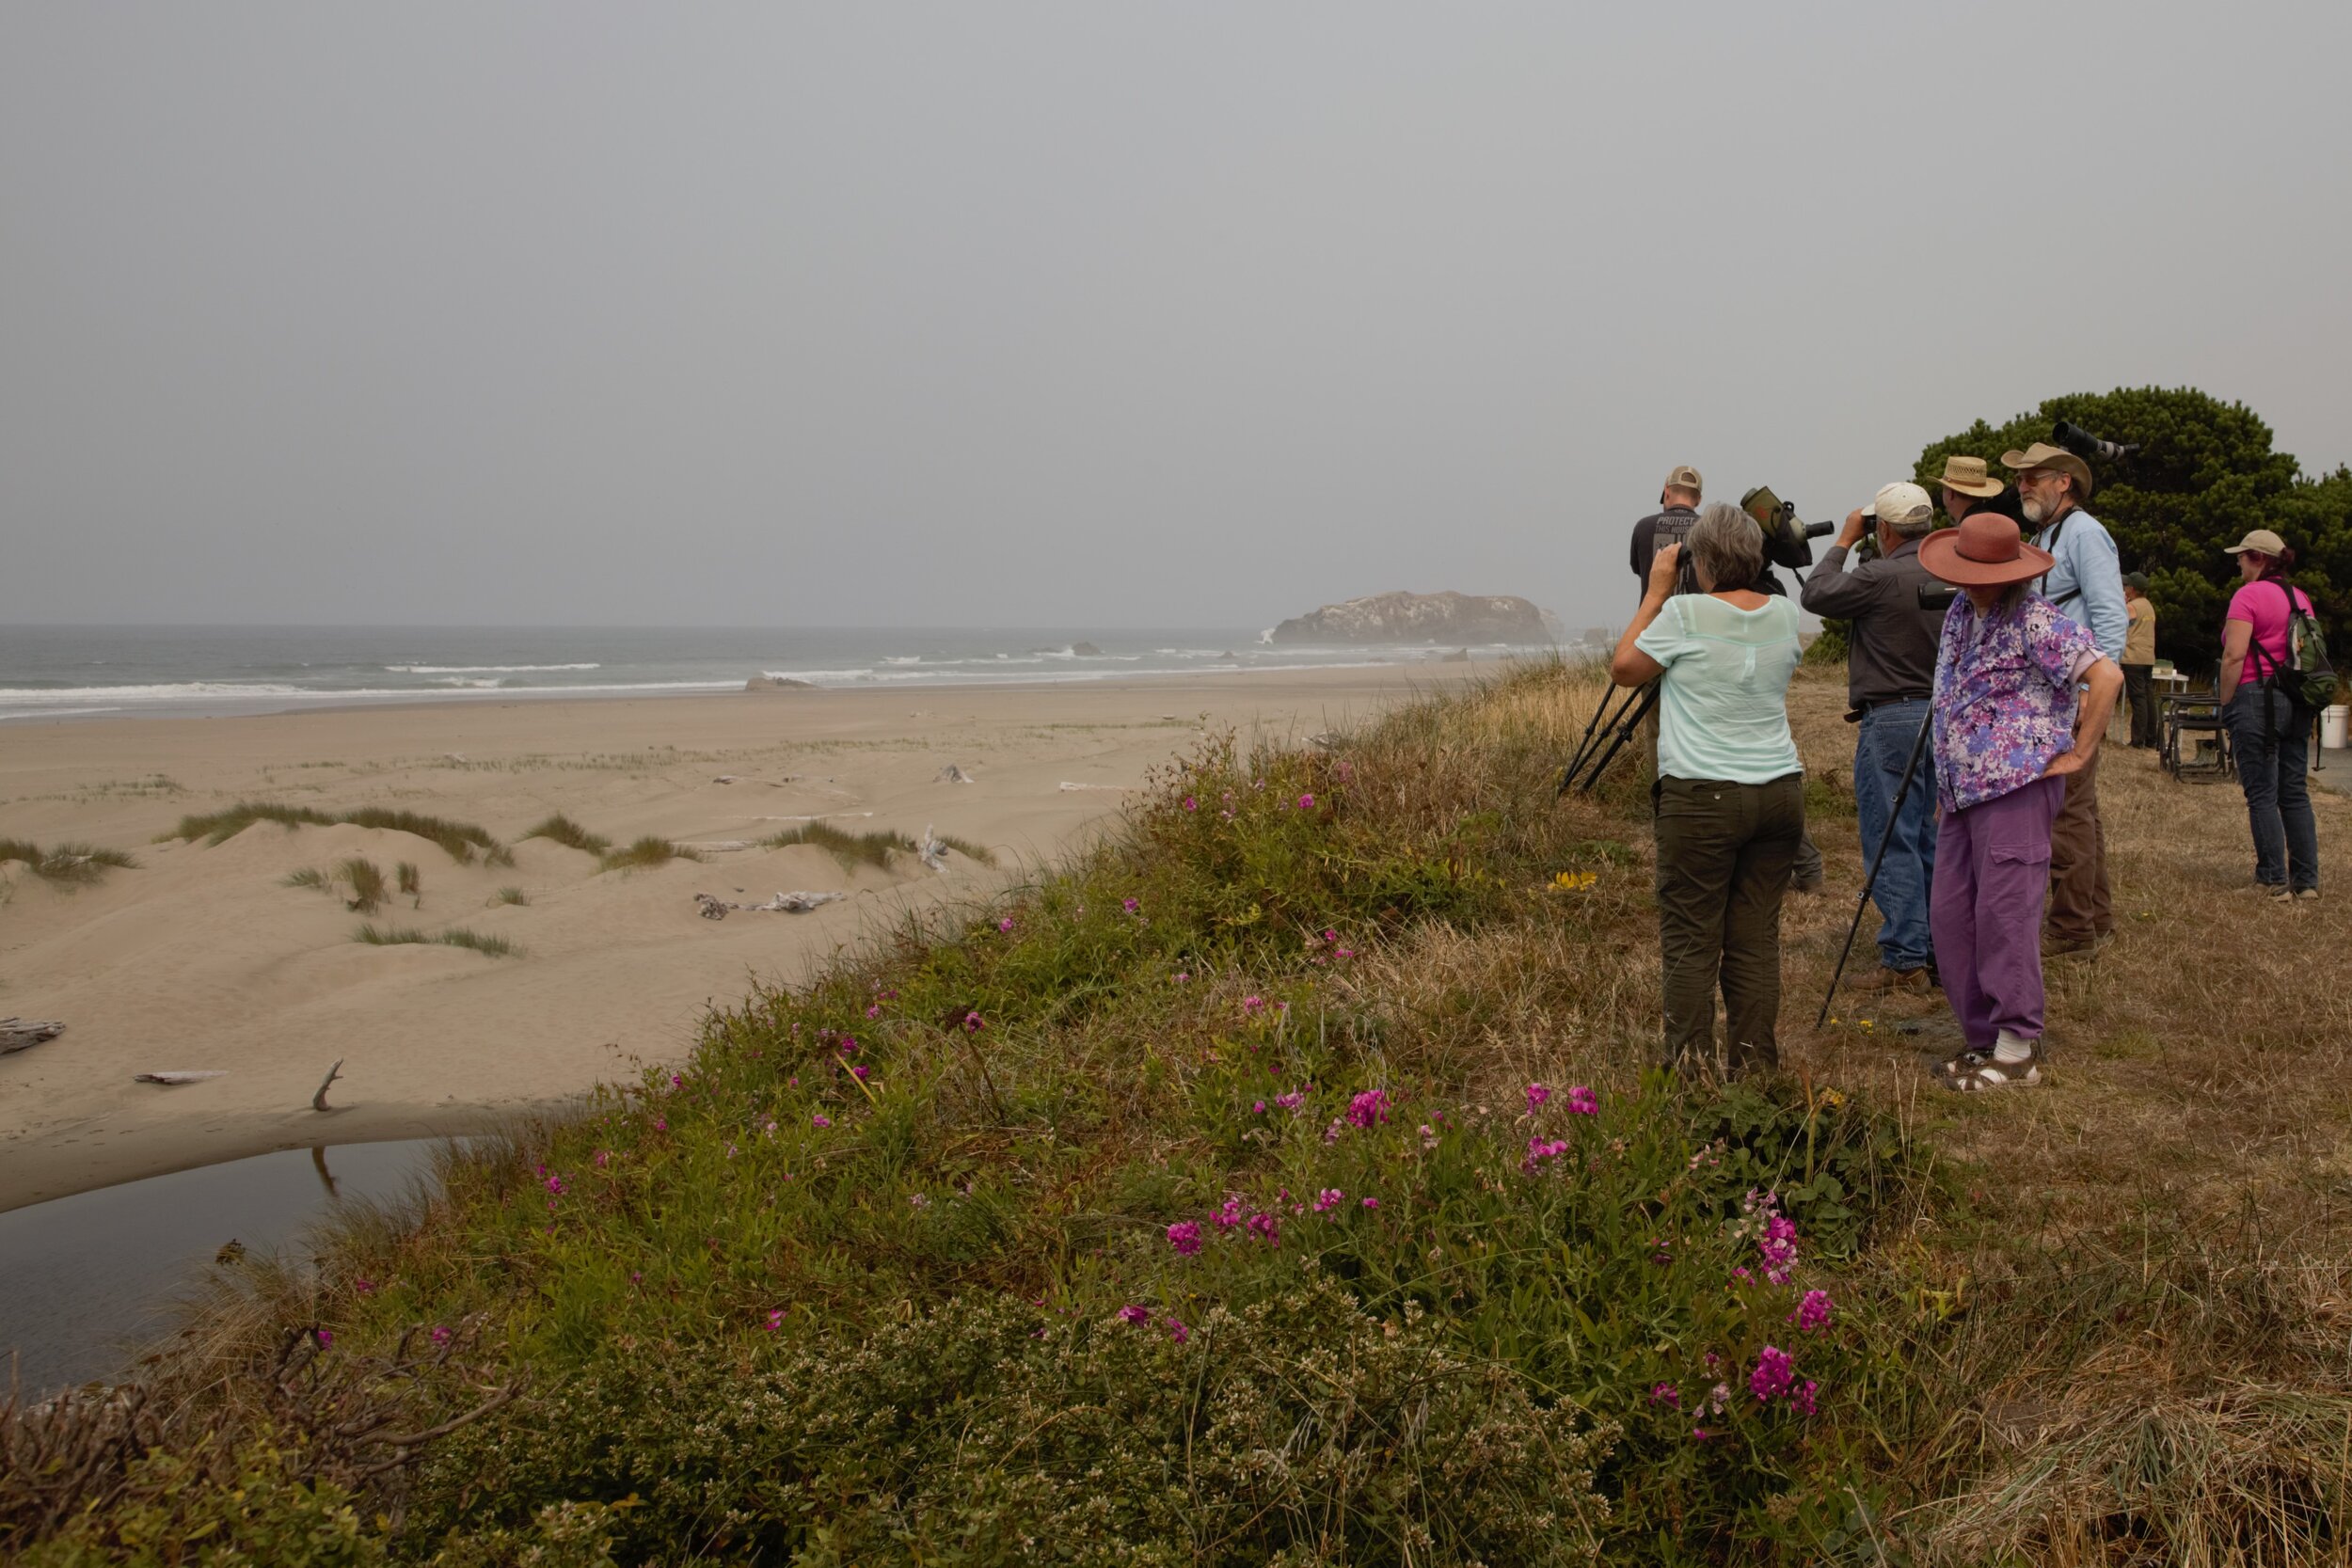  Searching for Snowy Plovers at China Creek. Photo by Lila Bowen 